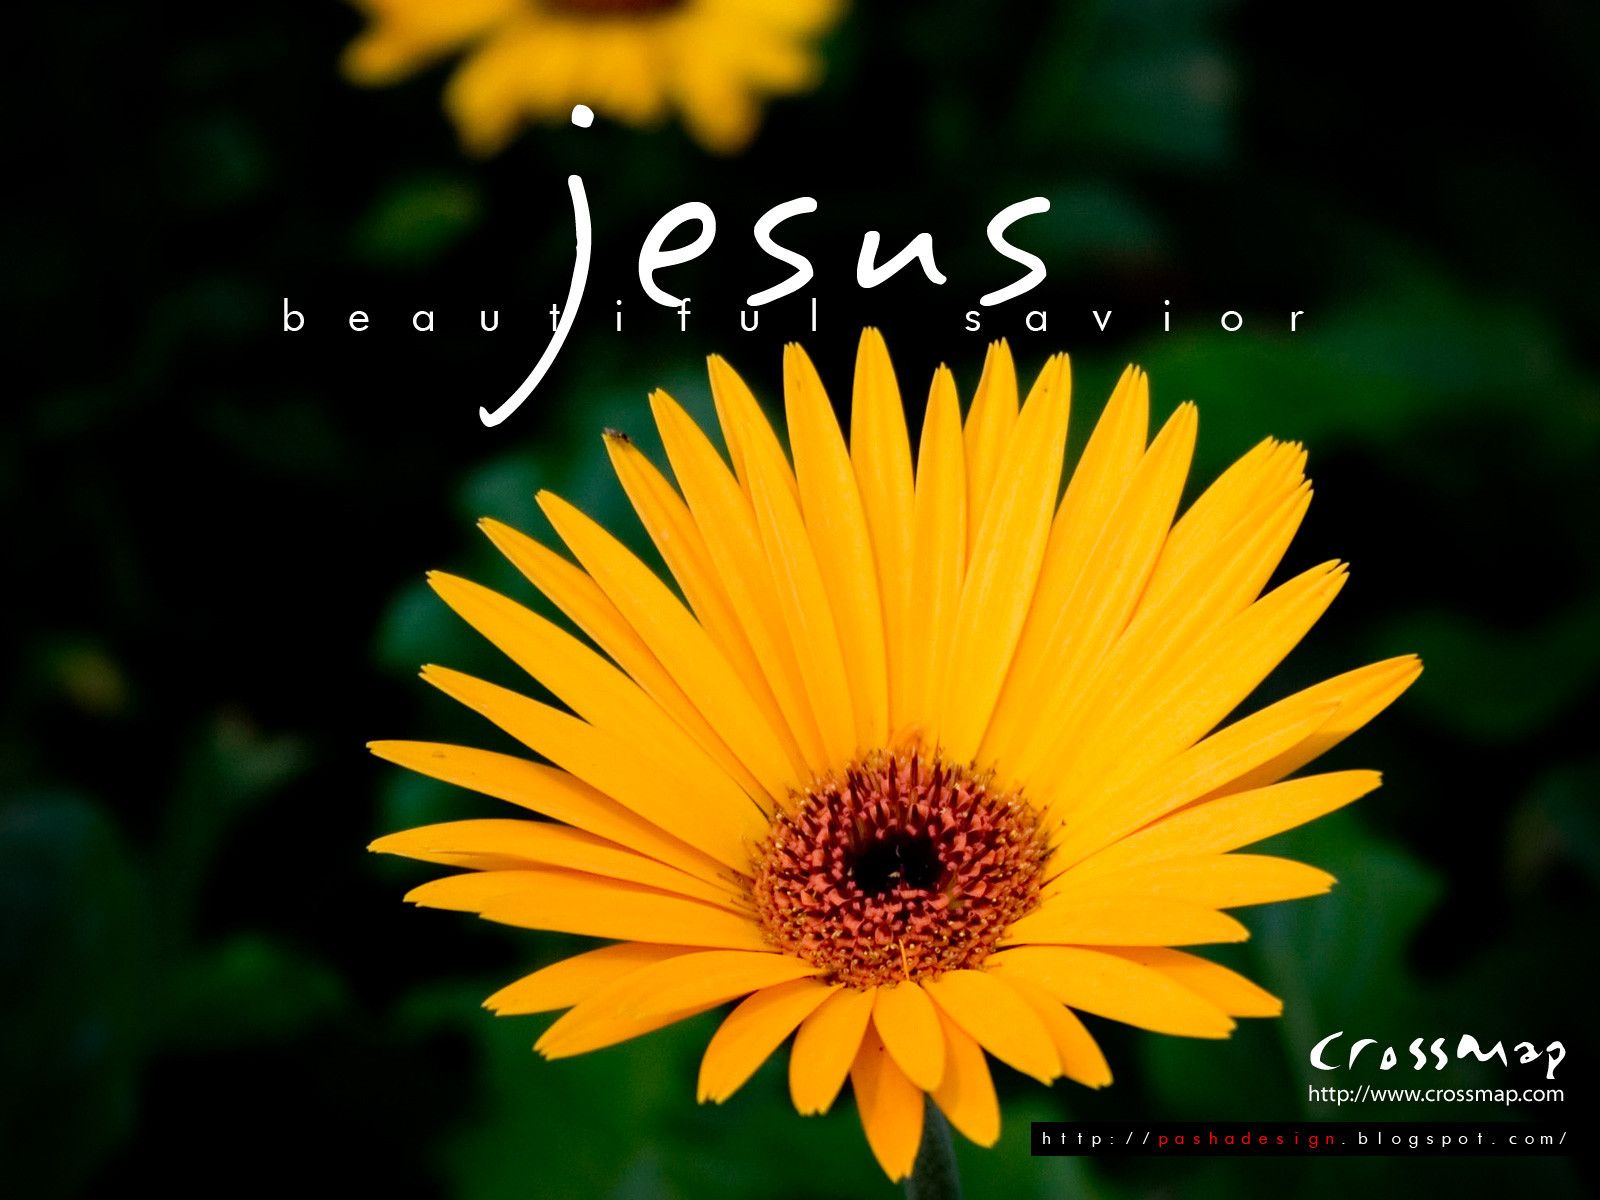 Beautiful Pictures Of Jesus Wallpapers - Wallpaper Cave